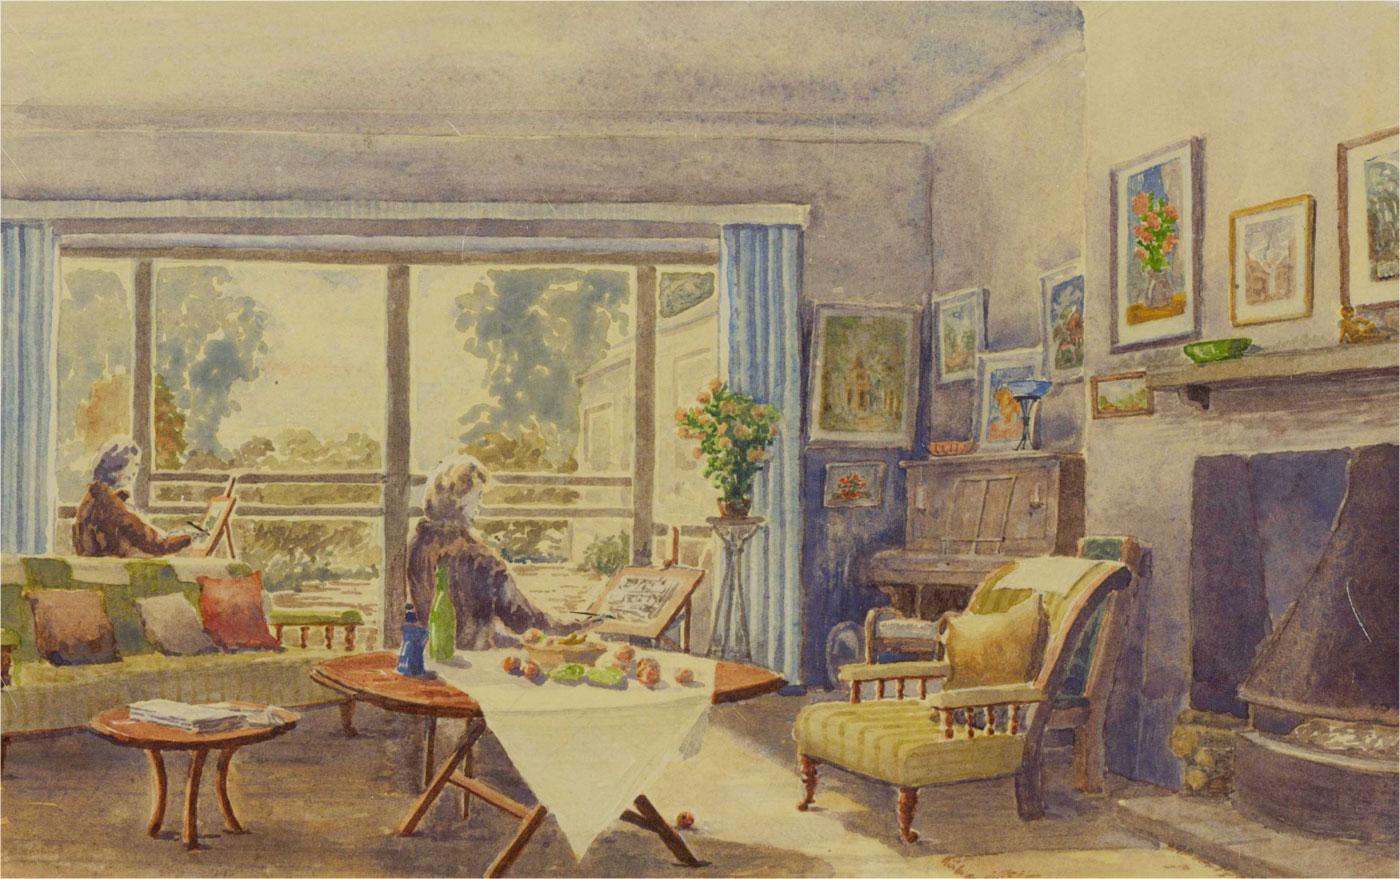 A wonderfully intimate interior scene showing a stylish living room interior with art on the walls and two women, both seated at easels, painting, by the glass doors to the garden. The artist has signed and dated to the lower right and the painting